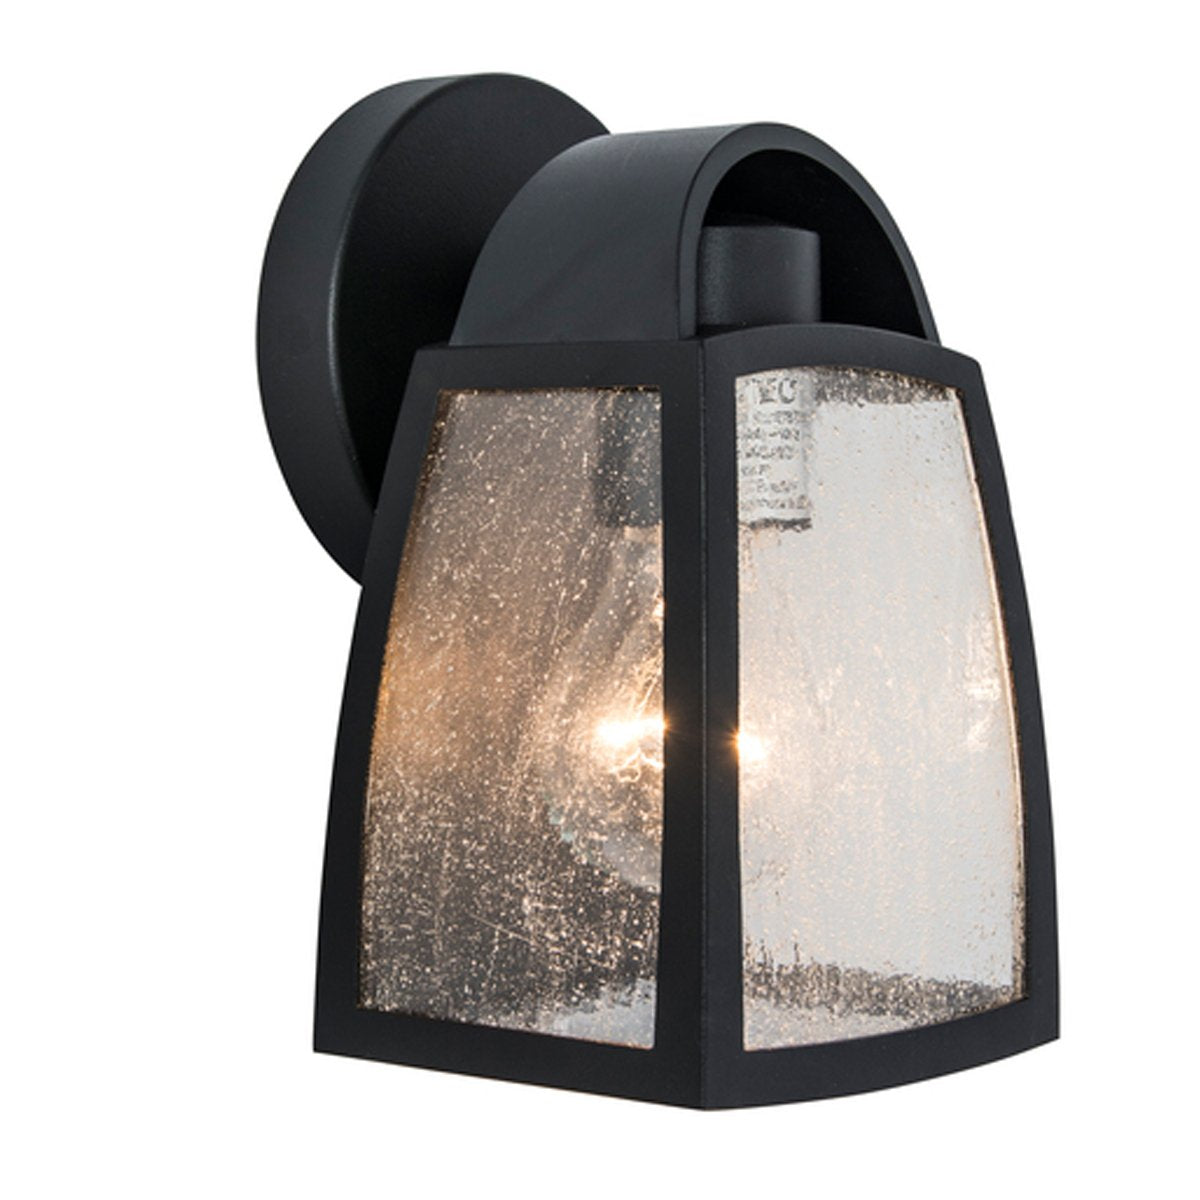 Our industrial style outdoor light is made from high-quality fully weather and rust proof black metal material and is complimented with a clear glass wet look diffuser. Easy to install, and also suitable for installation inside. The modern and contemporary design would suit modern and traditional homes.